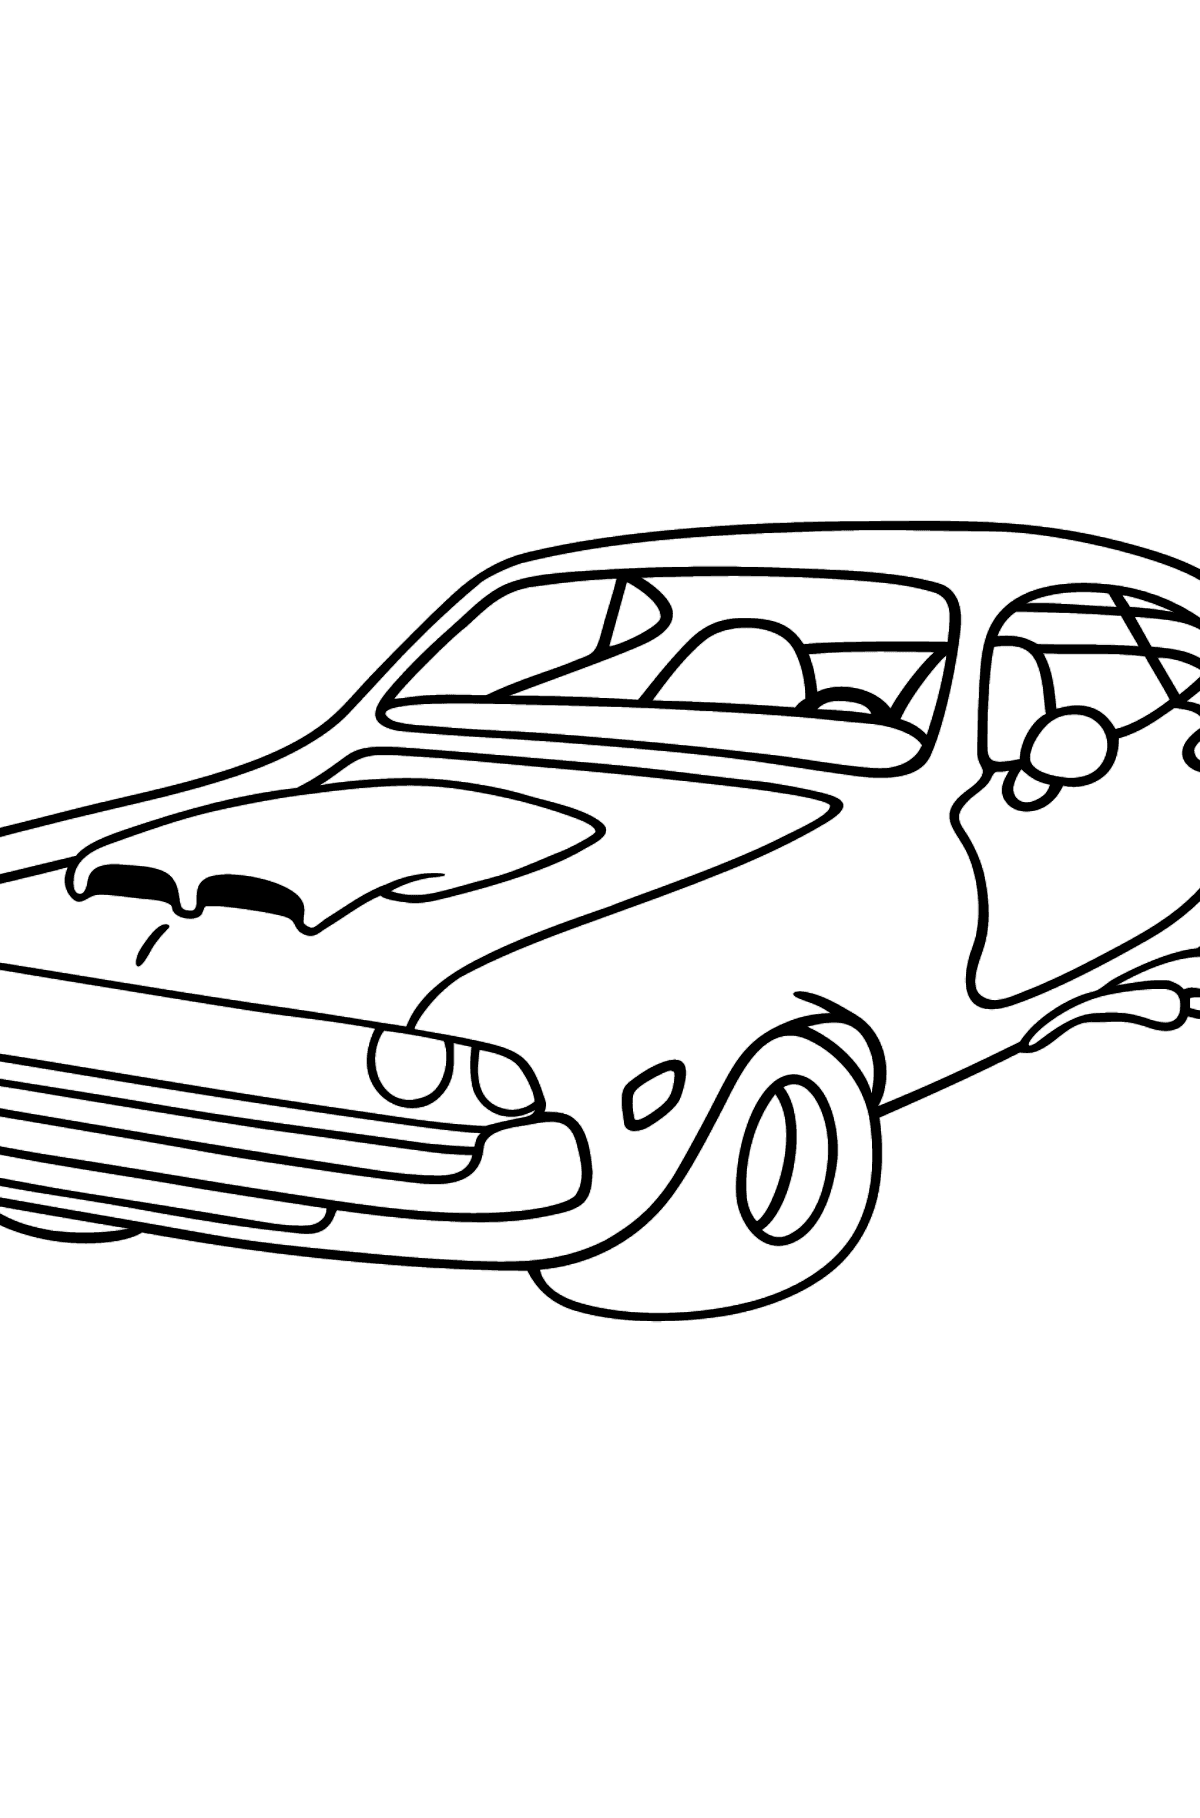 Chevrolet-Chevy Sports Car coloring page - Coloring Pages for Kids